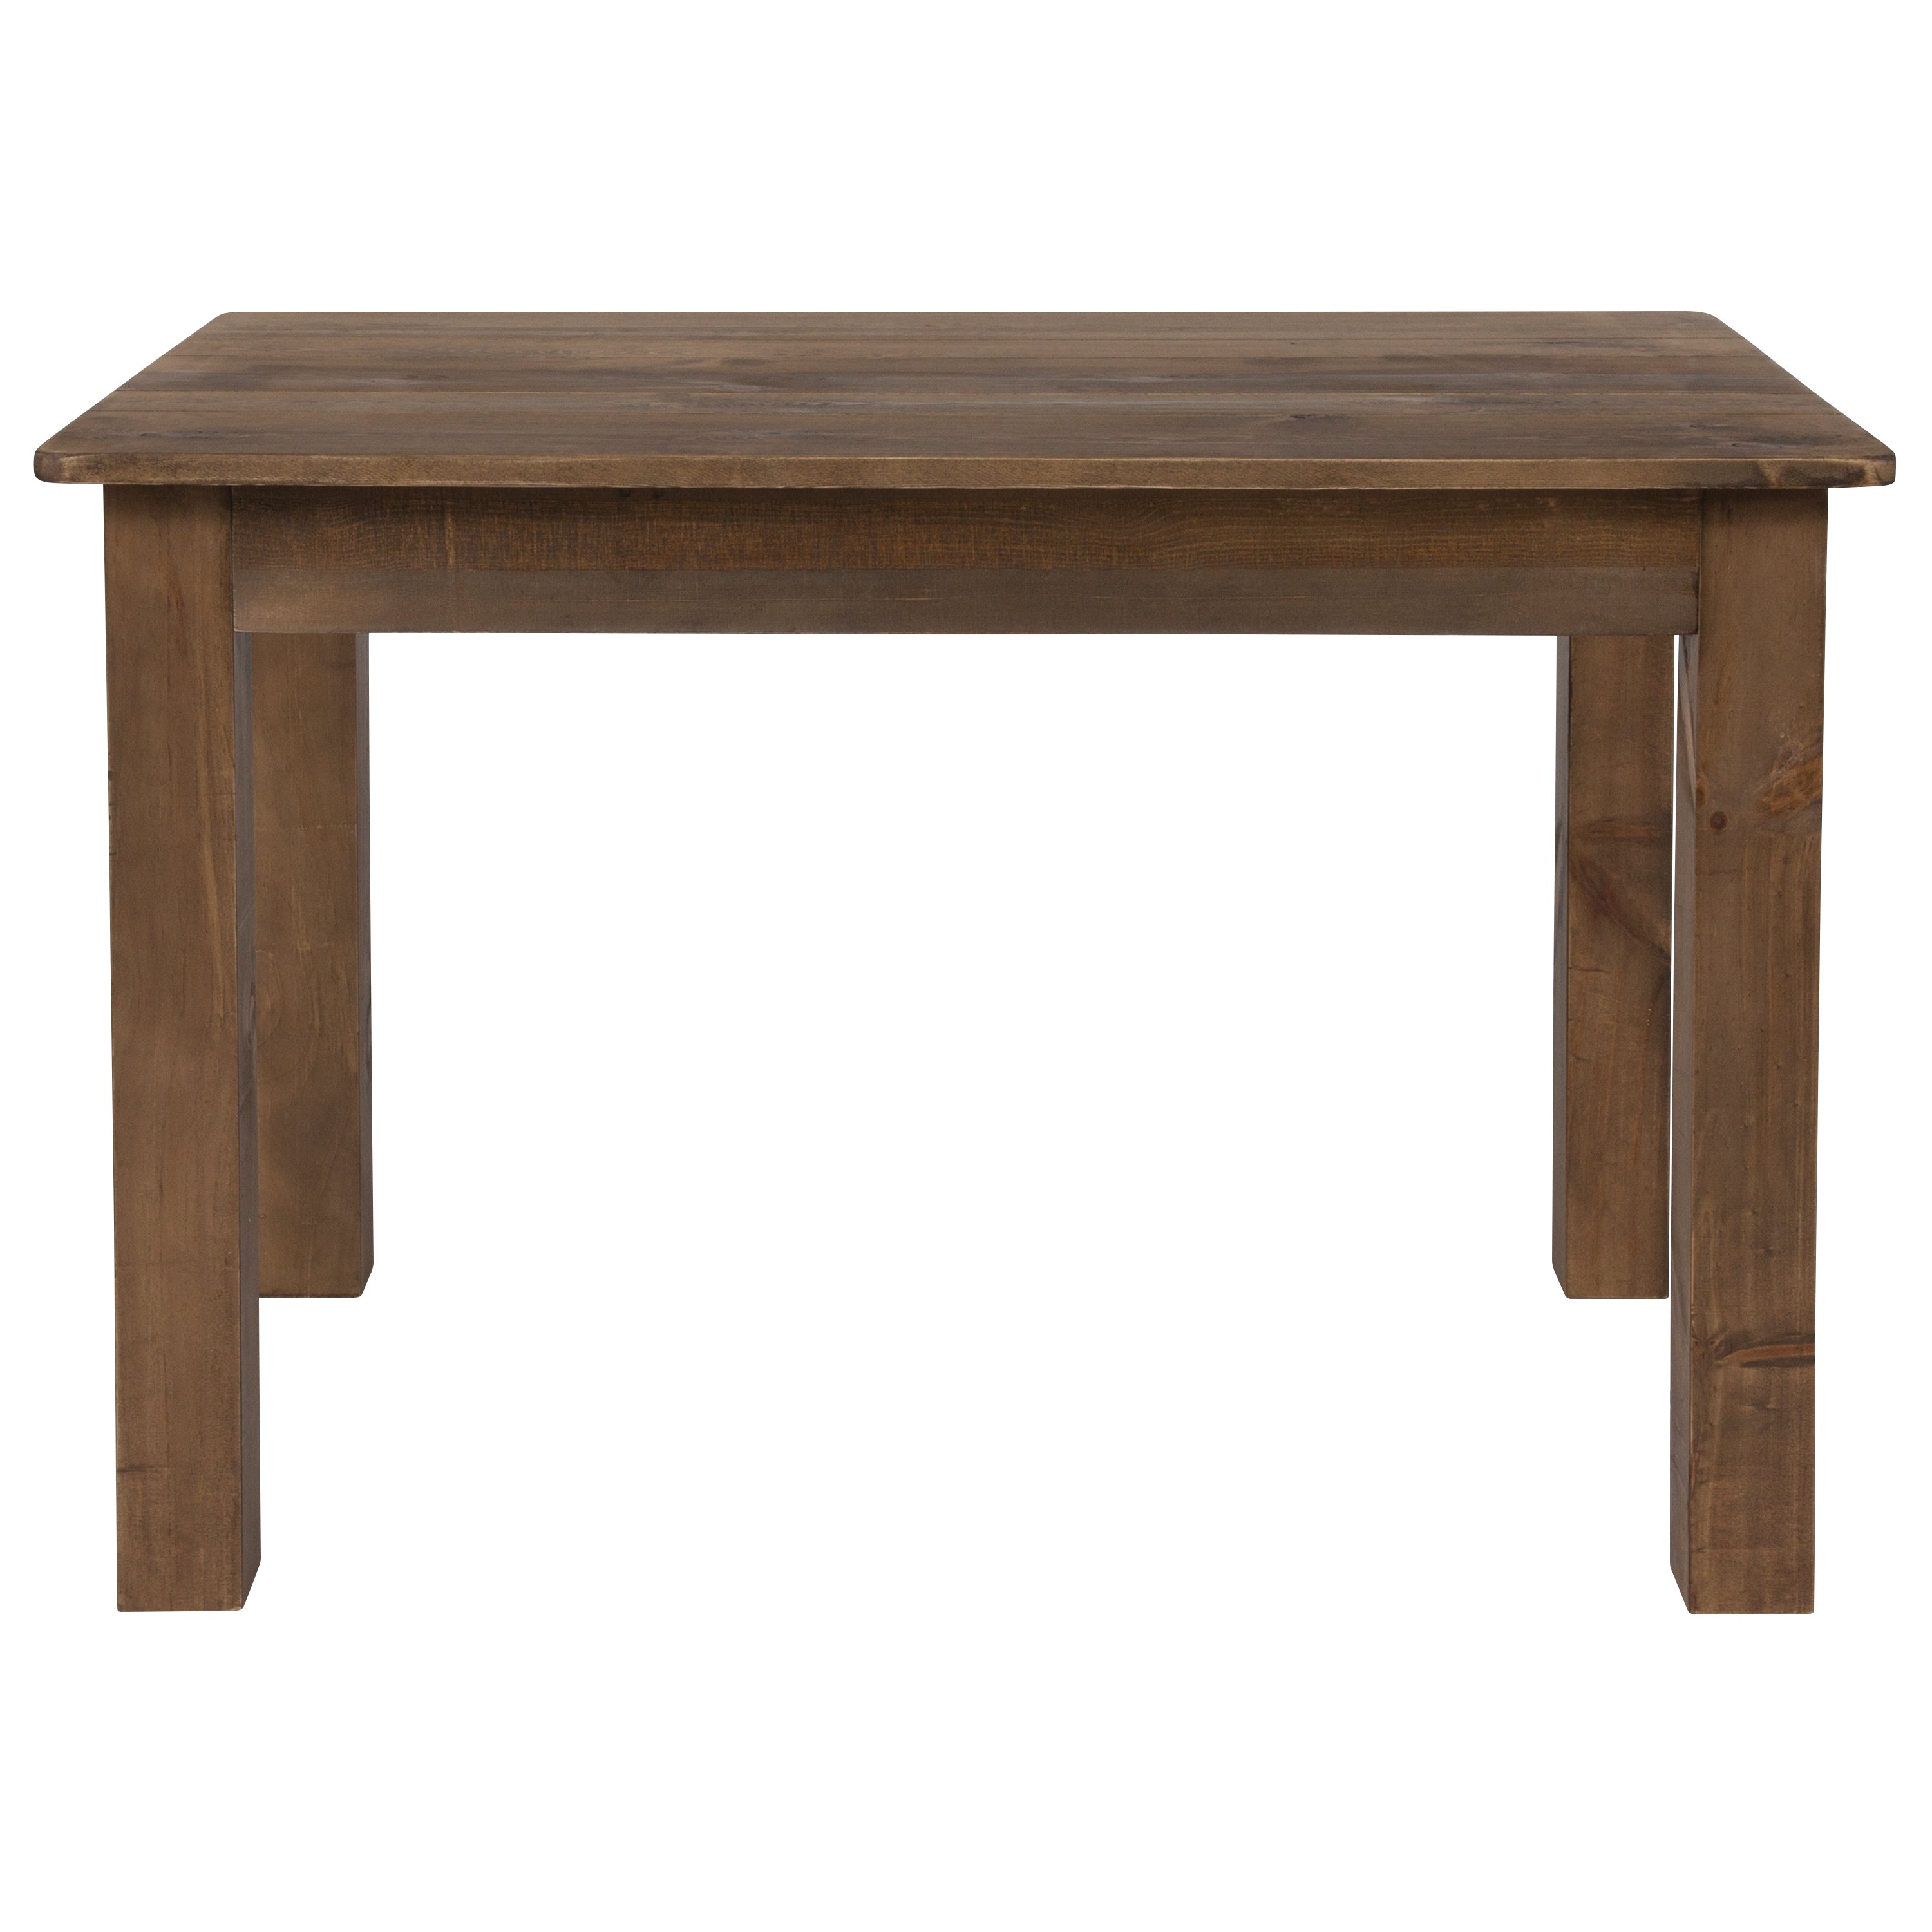 46" x 30" Rectangular Solid Pine Farm Dining Table-Dining Table-Flash Furniture-Wall2Wall Furnishings